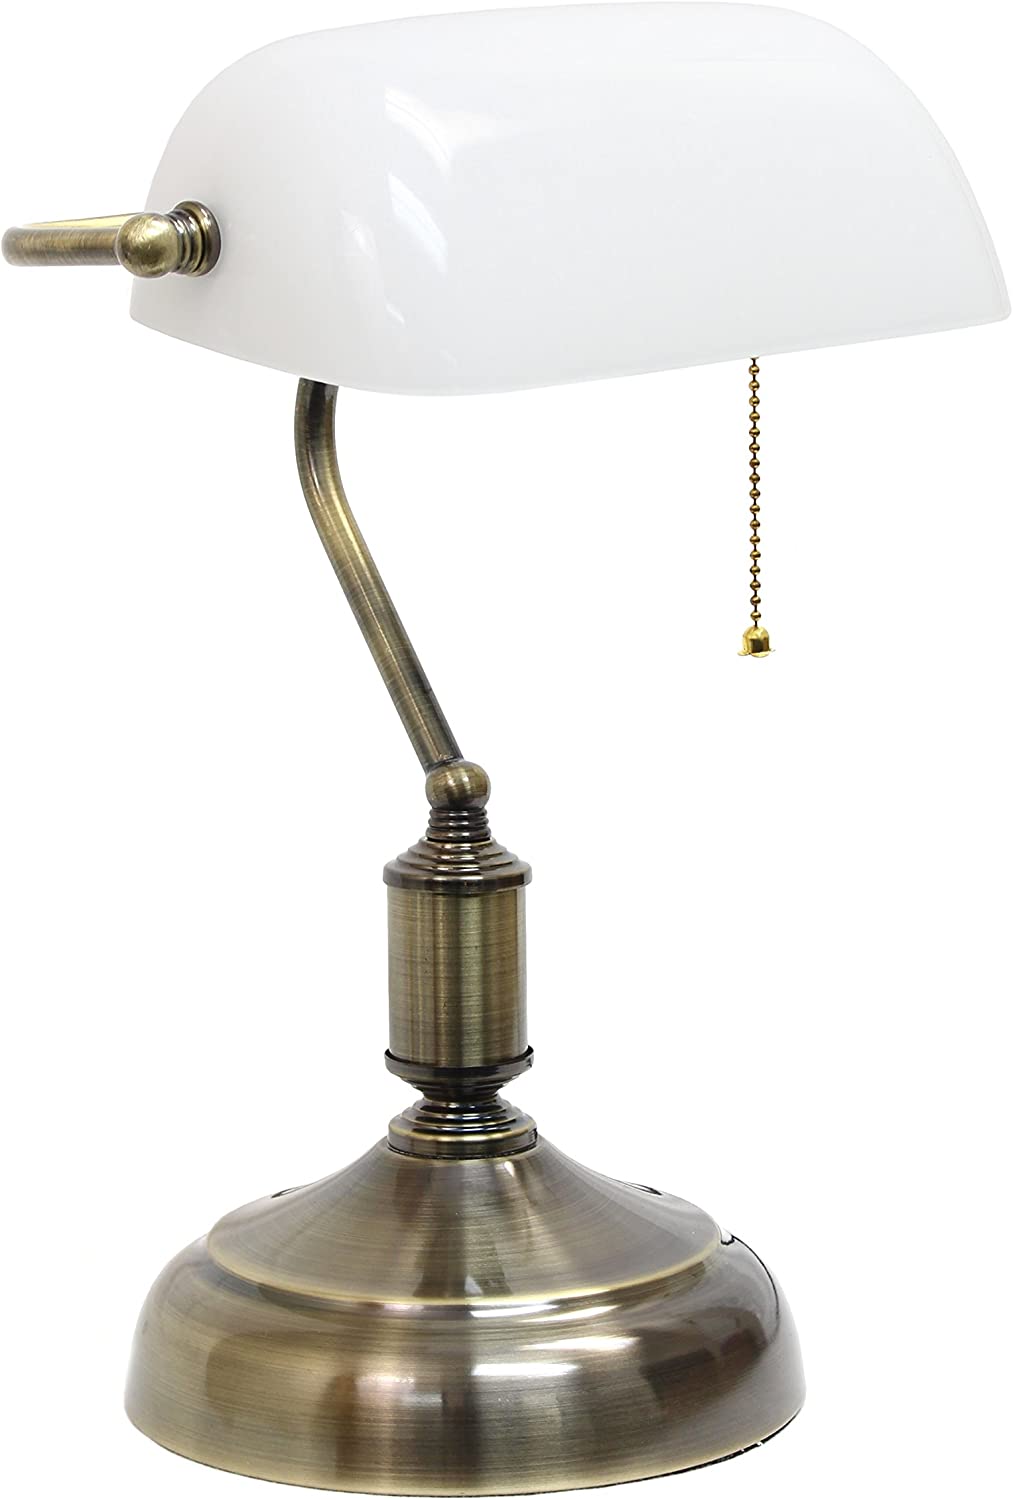 Simple Designs LT3216-WHT Executive Banker's Glass Shade, Desk Lamp, Antique Nickel/White